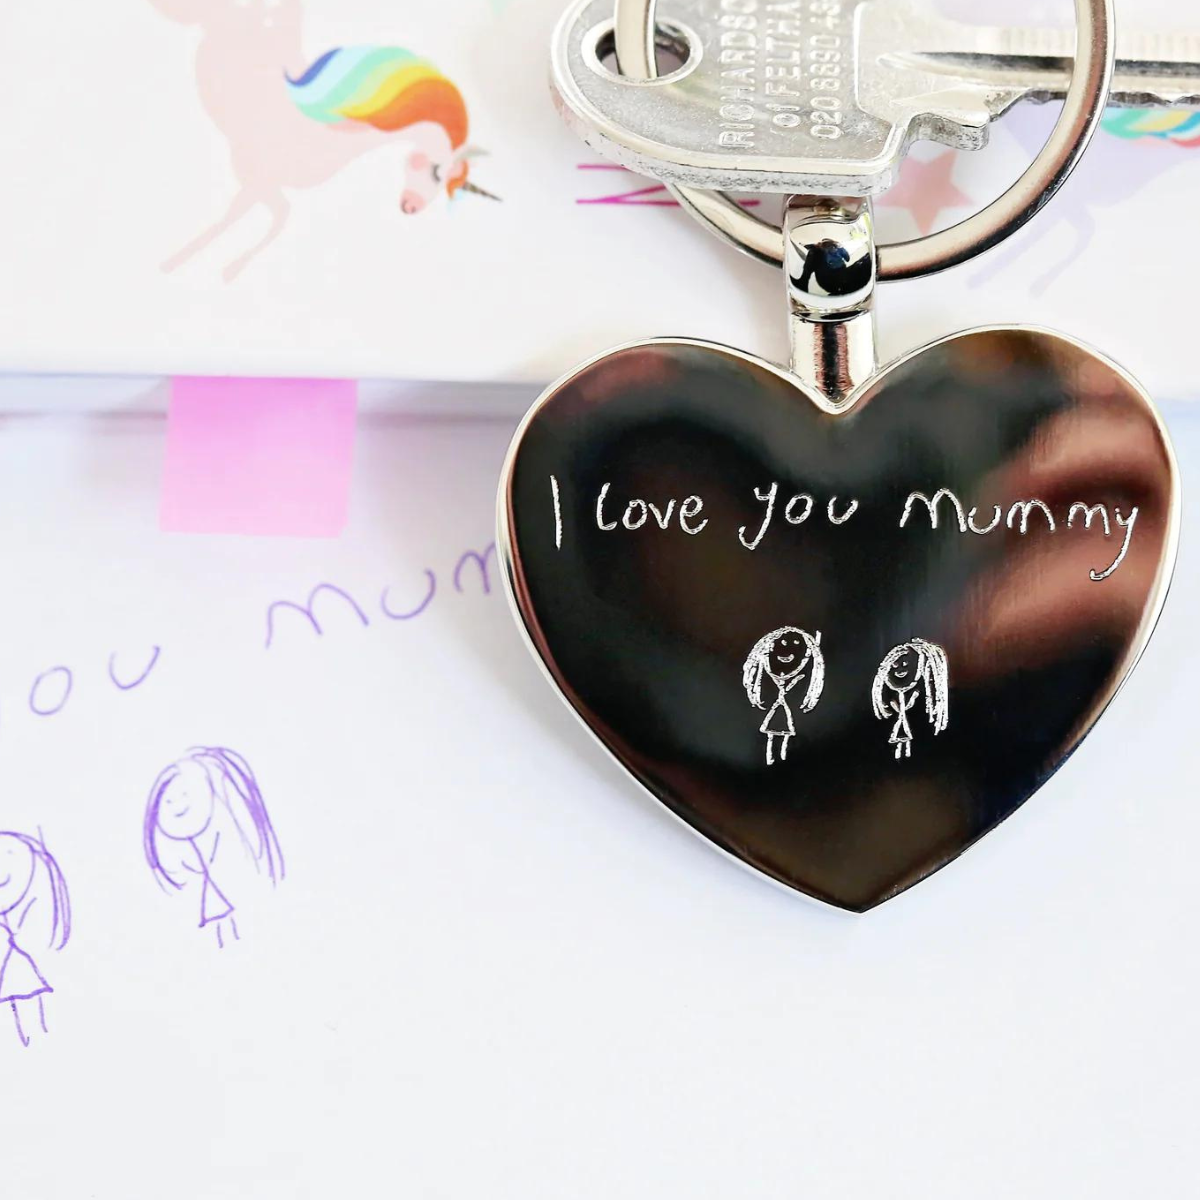 Image of a heart pendant keyring that can be engraved with your own handwriting and/or drawing.  A keyring is attached to the pendant which enables you to attach it to keys or a bag.